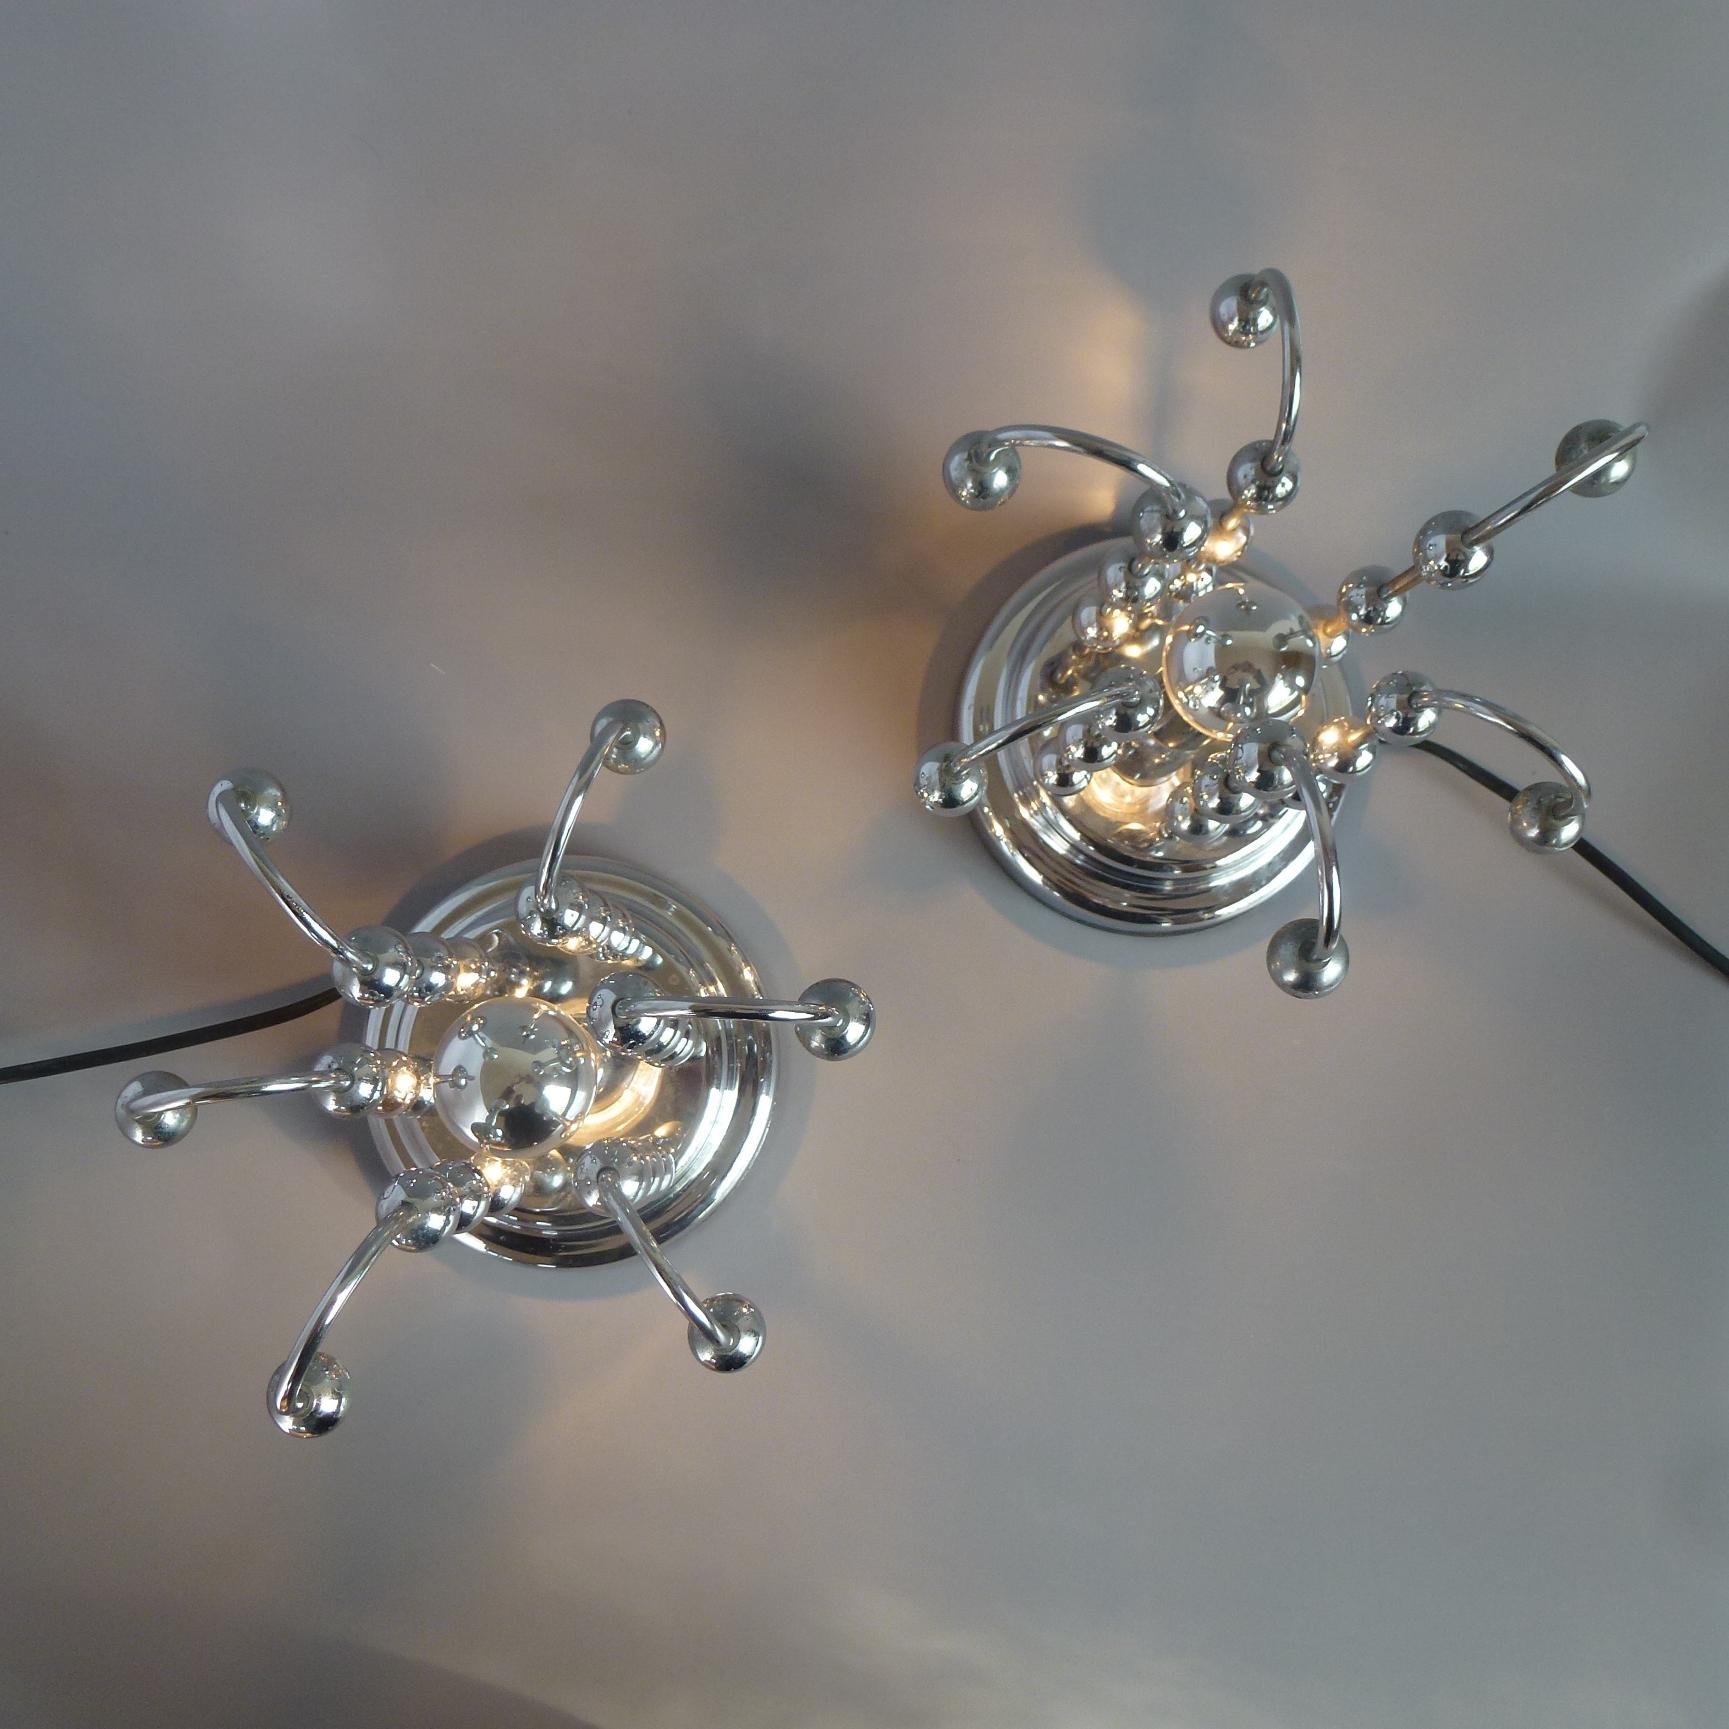 Pair of Mid-Century Space Age Chrome Table or Nightstand Lamps, Italy, 1960s For Sale 2